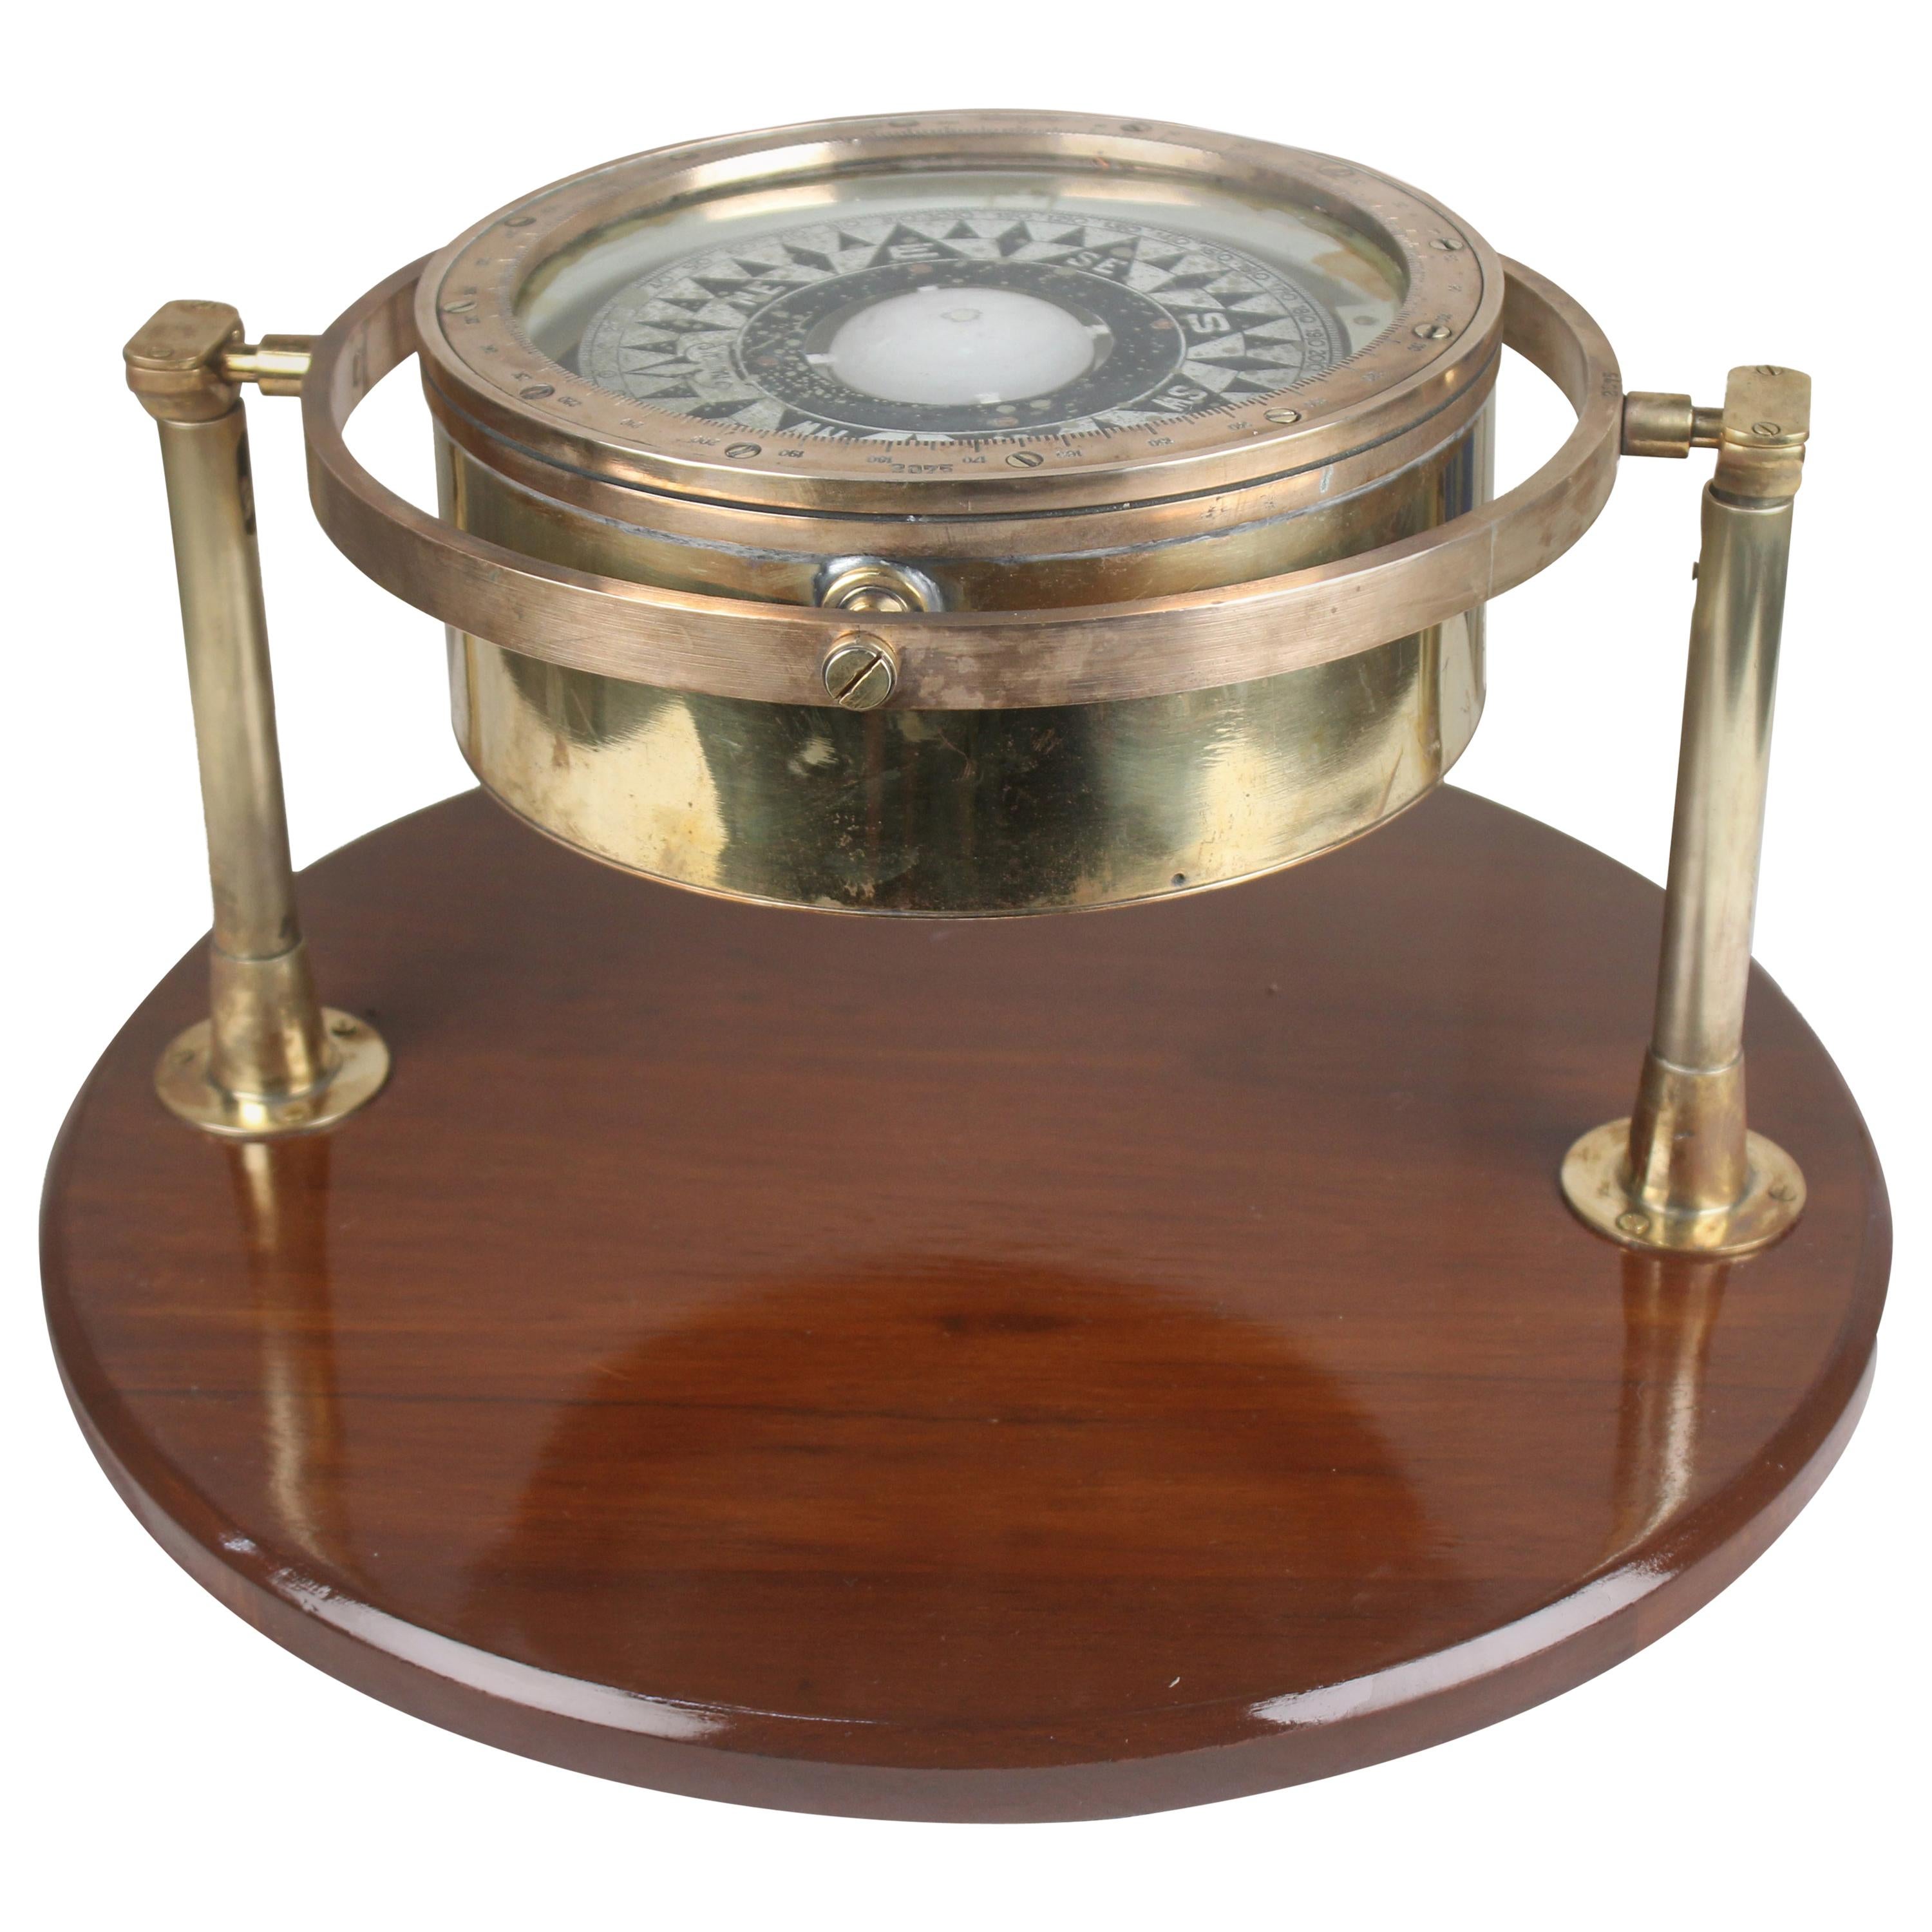 Brass Nautical Lifeboat Compass on Gimbaled Stand, English, 1940s